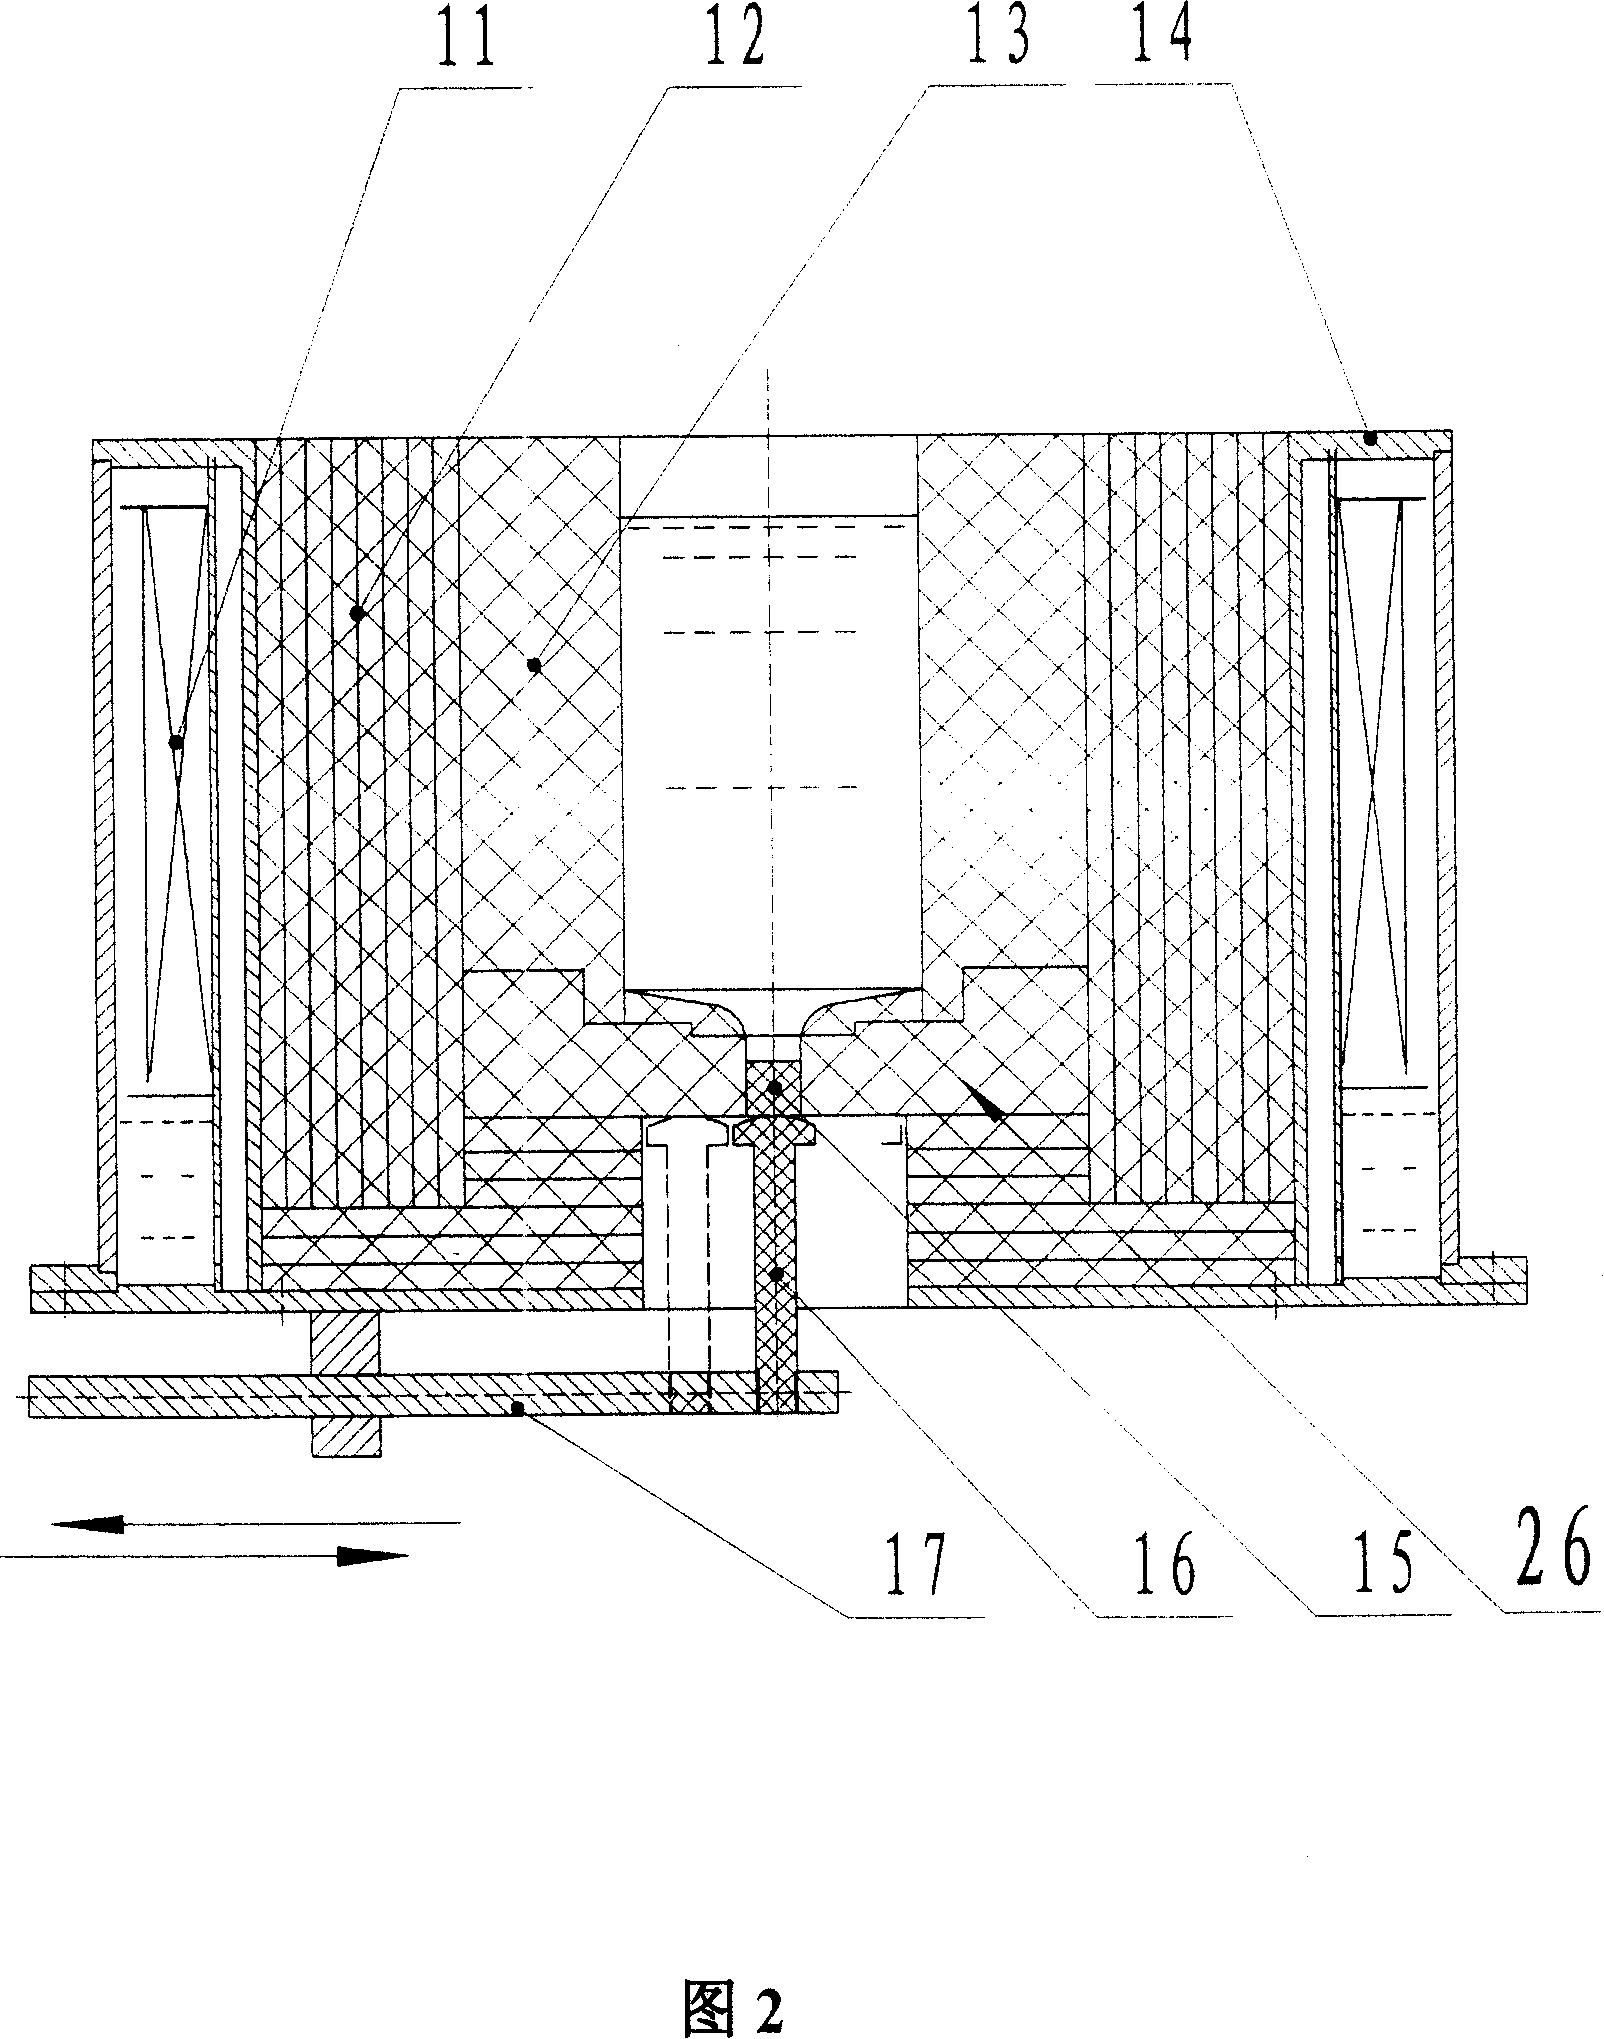 Vacuum melting furnace for preparing fusion casting type production of molybdenum from worn-out molybdenum